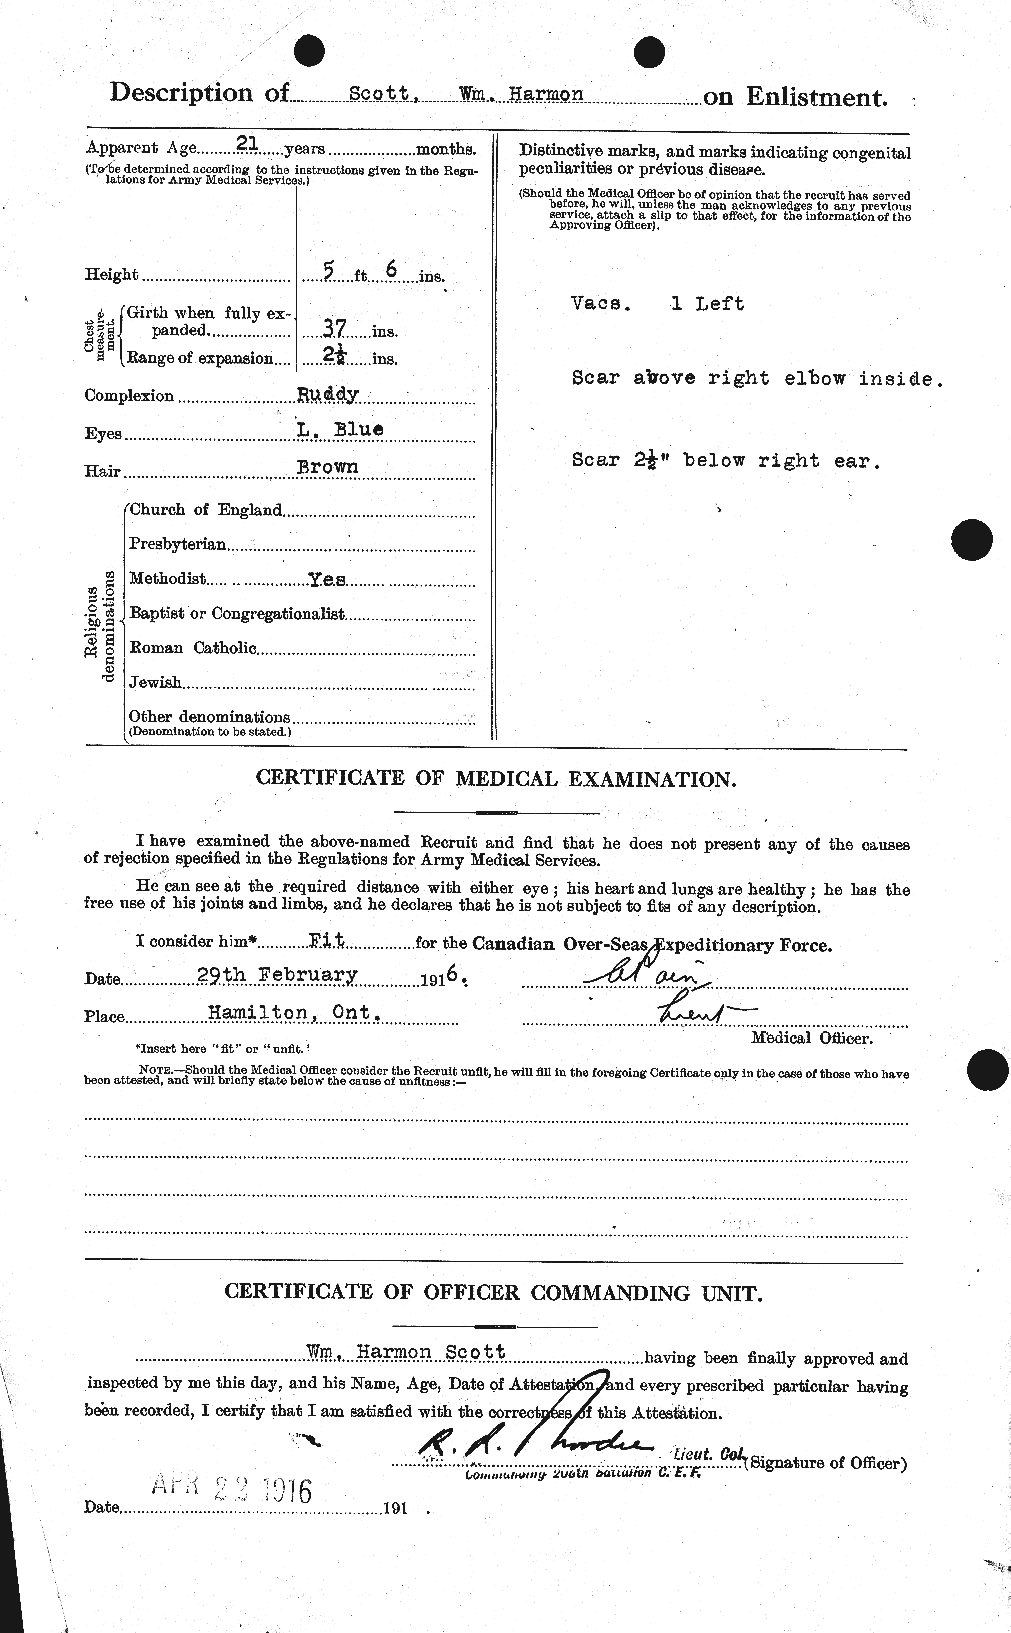 Personnel Records of the First World War - CEF 087005b